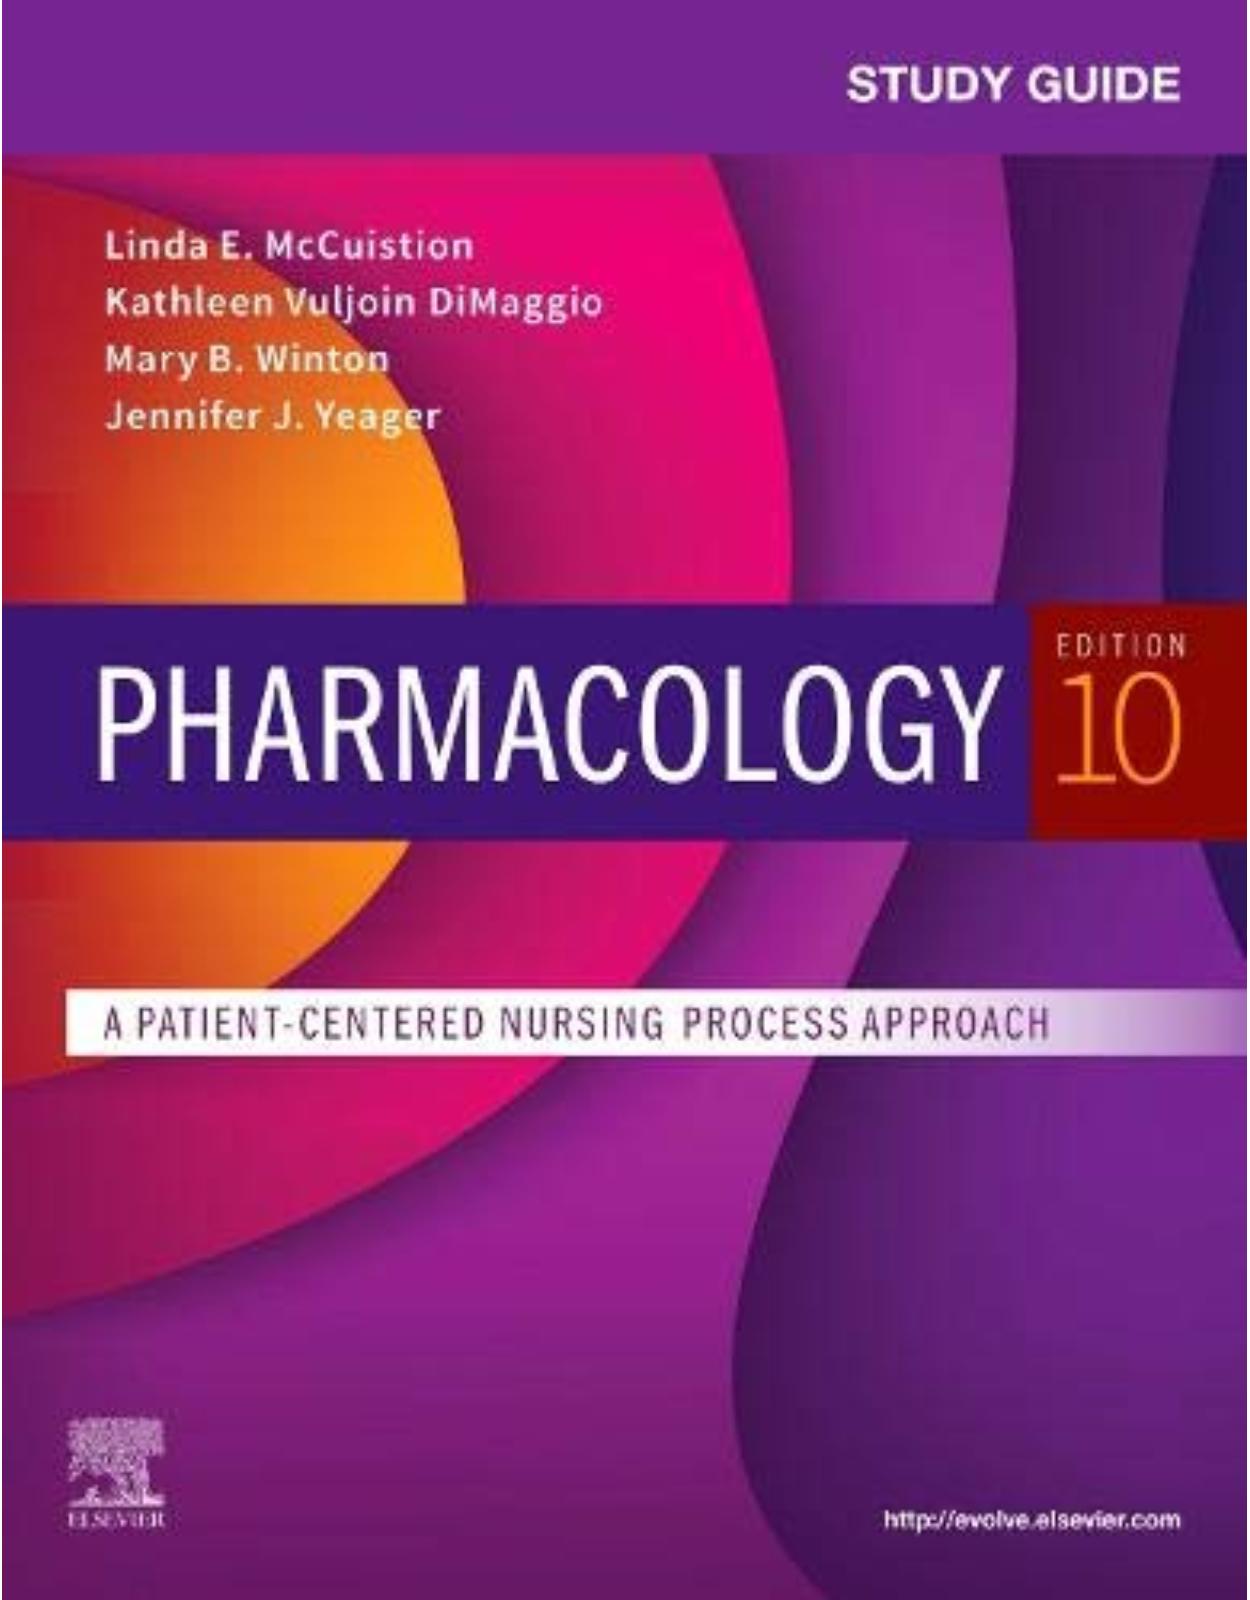 Study Guide for Pharmacology: A Patient-Centered Nursing Process Approach 